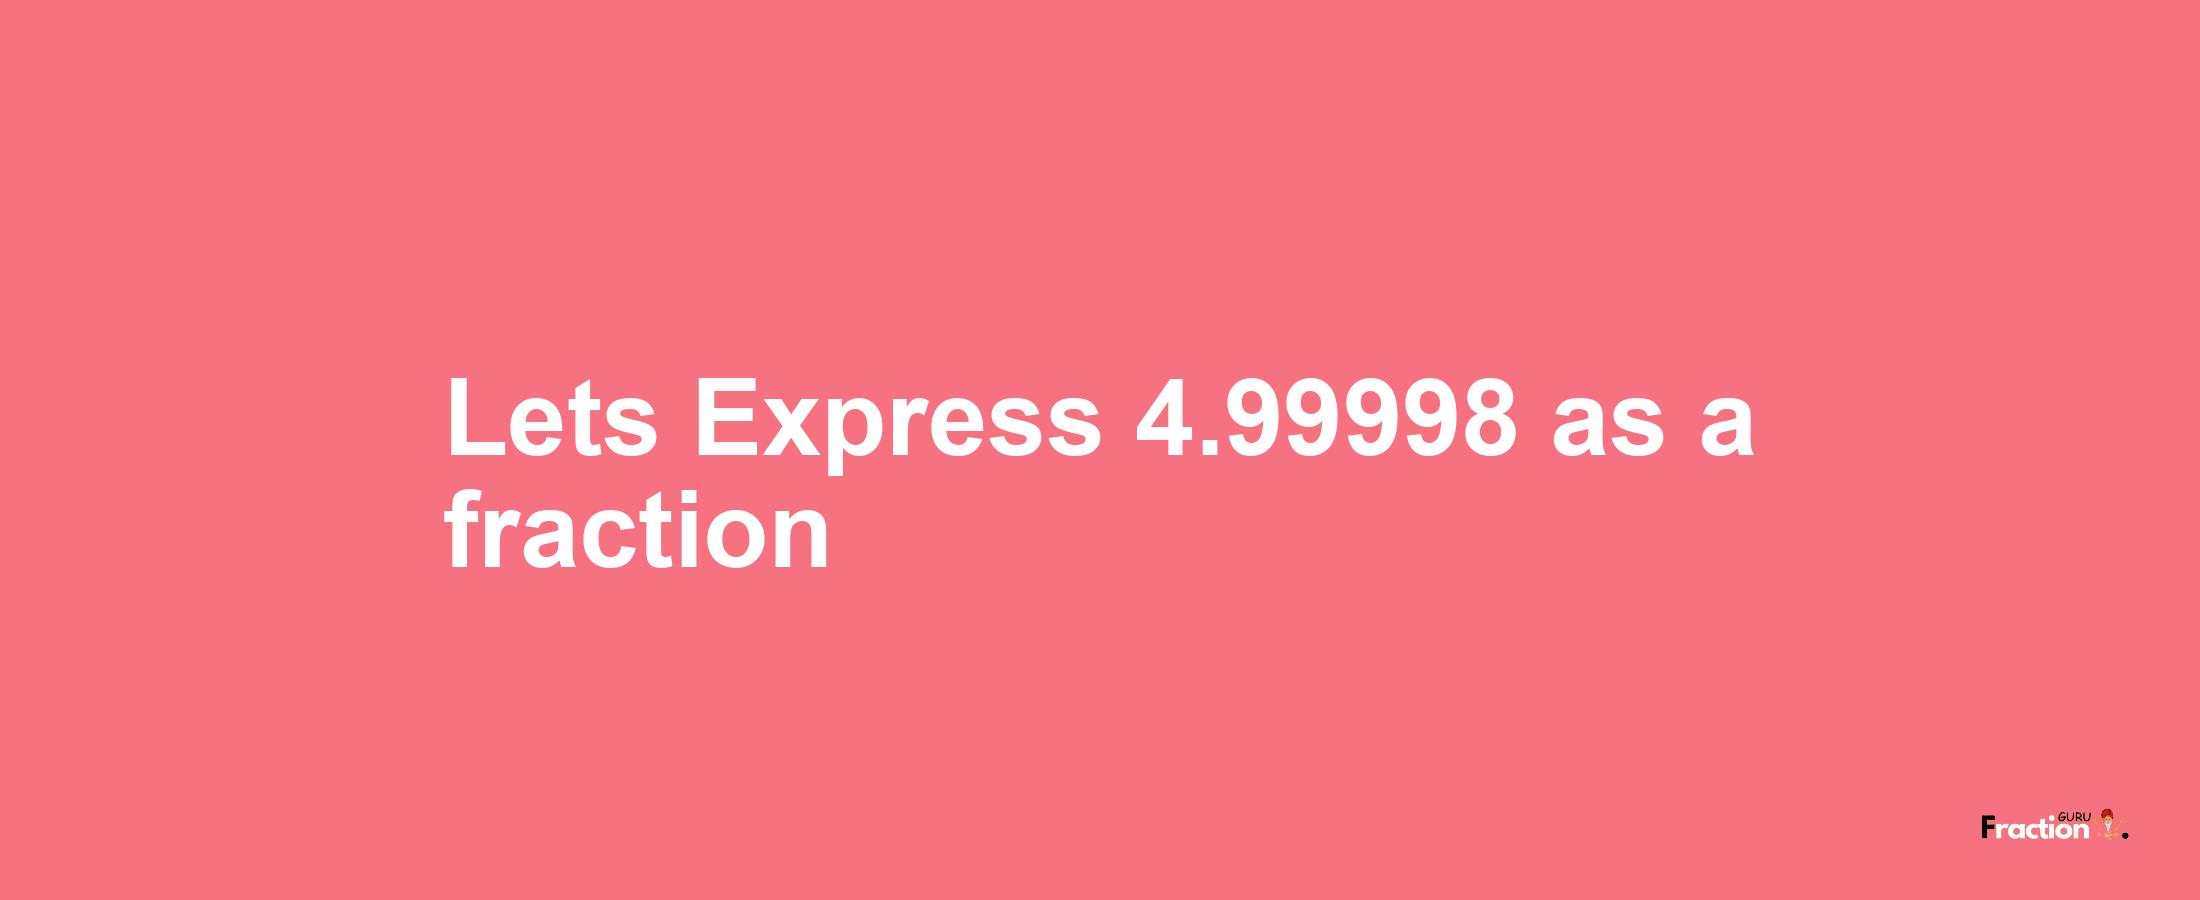 Lets Express 4.99998 as afraction